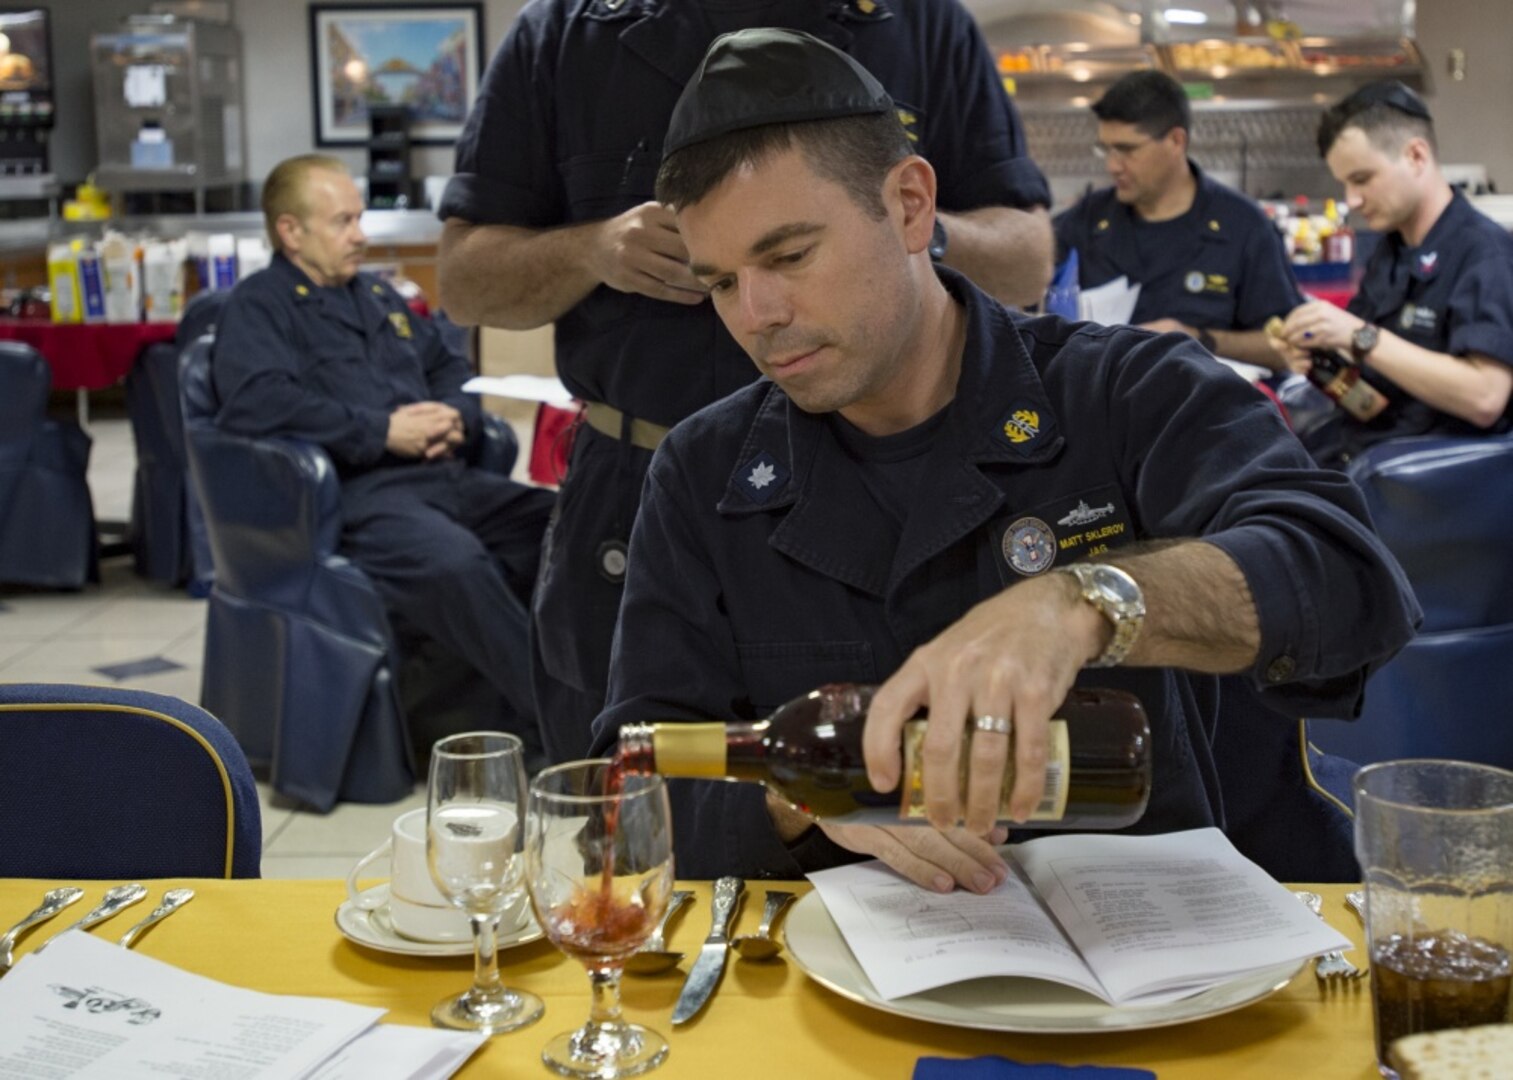 Navy Cmdr. Matt Sklerov, from New York, participates in a Passover Seder aboard the aircraft carrier USS Carl Vinson in the South China Sea, April 10, 2017. DLA Troop Support provides annual religious support to service members across the globe for the Easter and Passover holidays. This year, Troop Support provided more than 170,000 pounds of food, 11,000 Meals, Ready-to-Eat and 115 orders of palm, wine, Jewish ceremonial Seder kits and ashes.